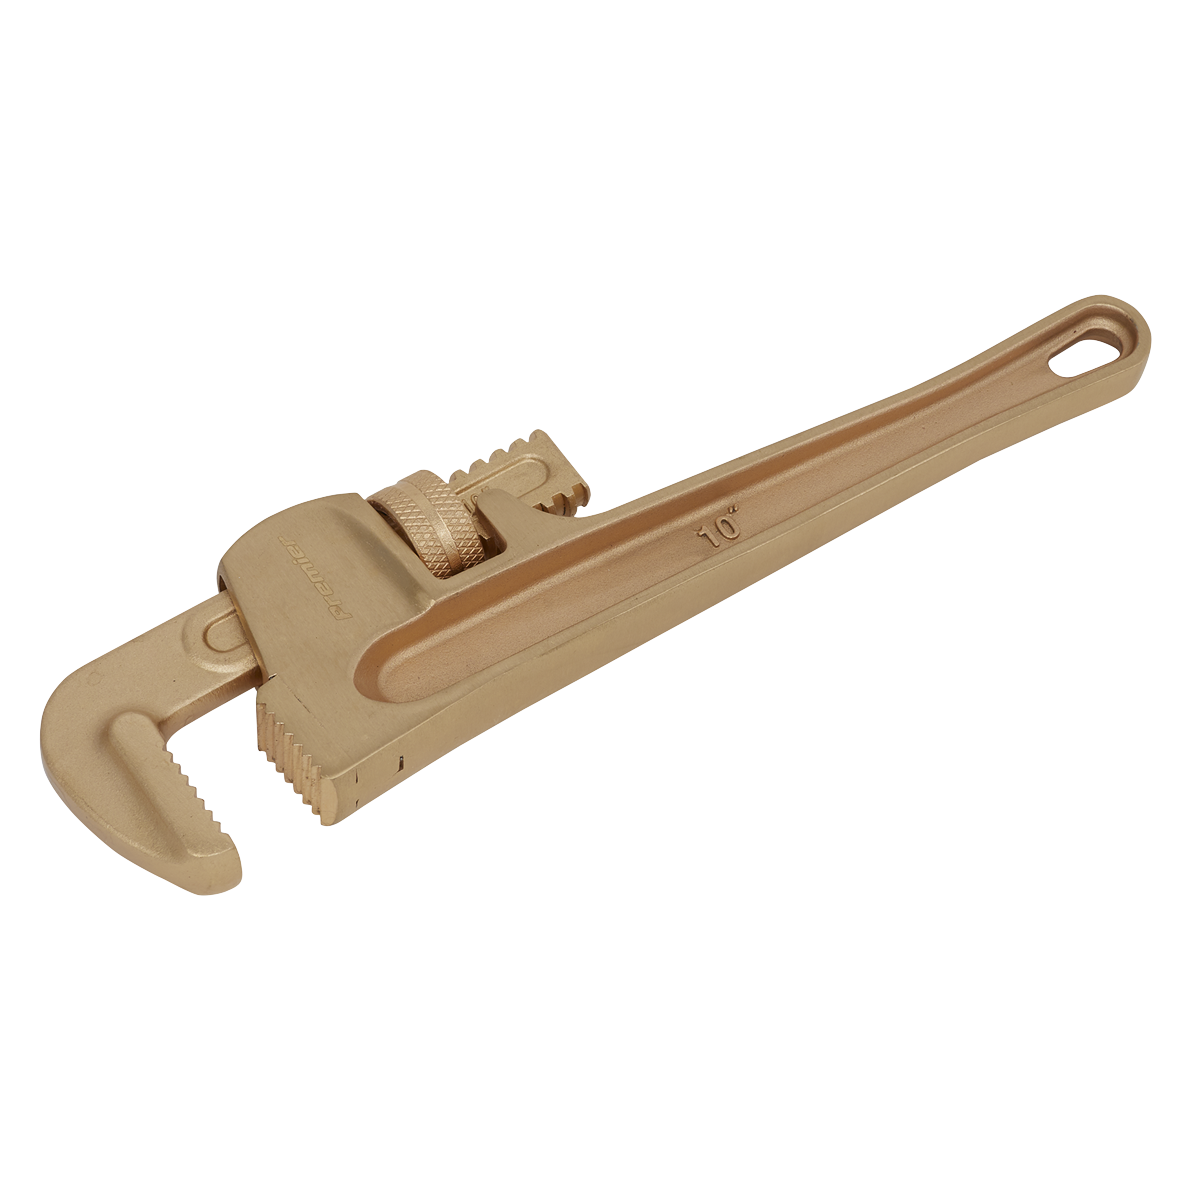 Sealey NS069 Pipe Wrench 250mm - Non-Sparking from Lawson HIS